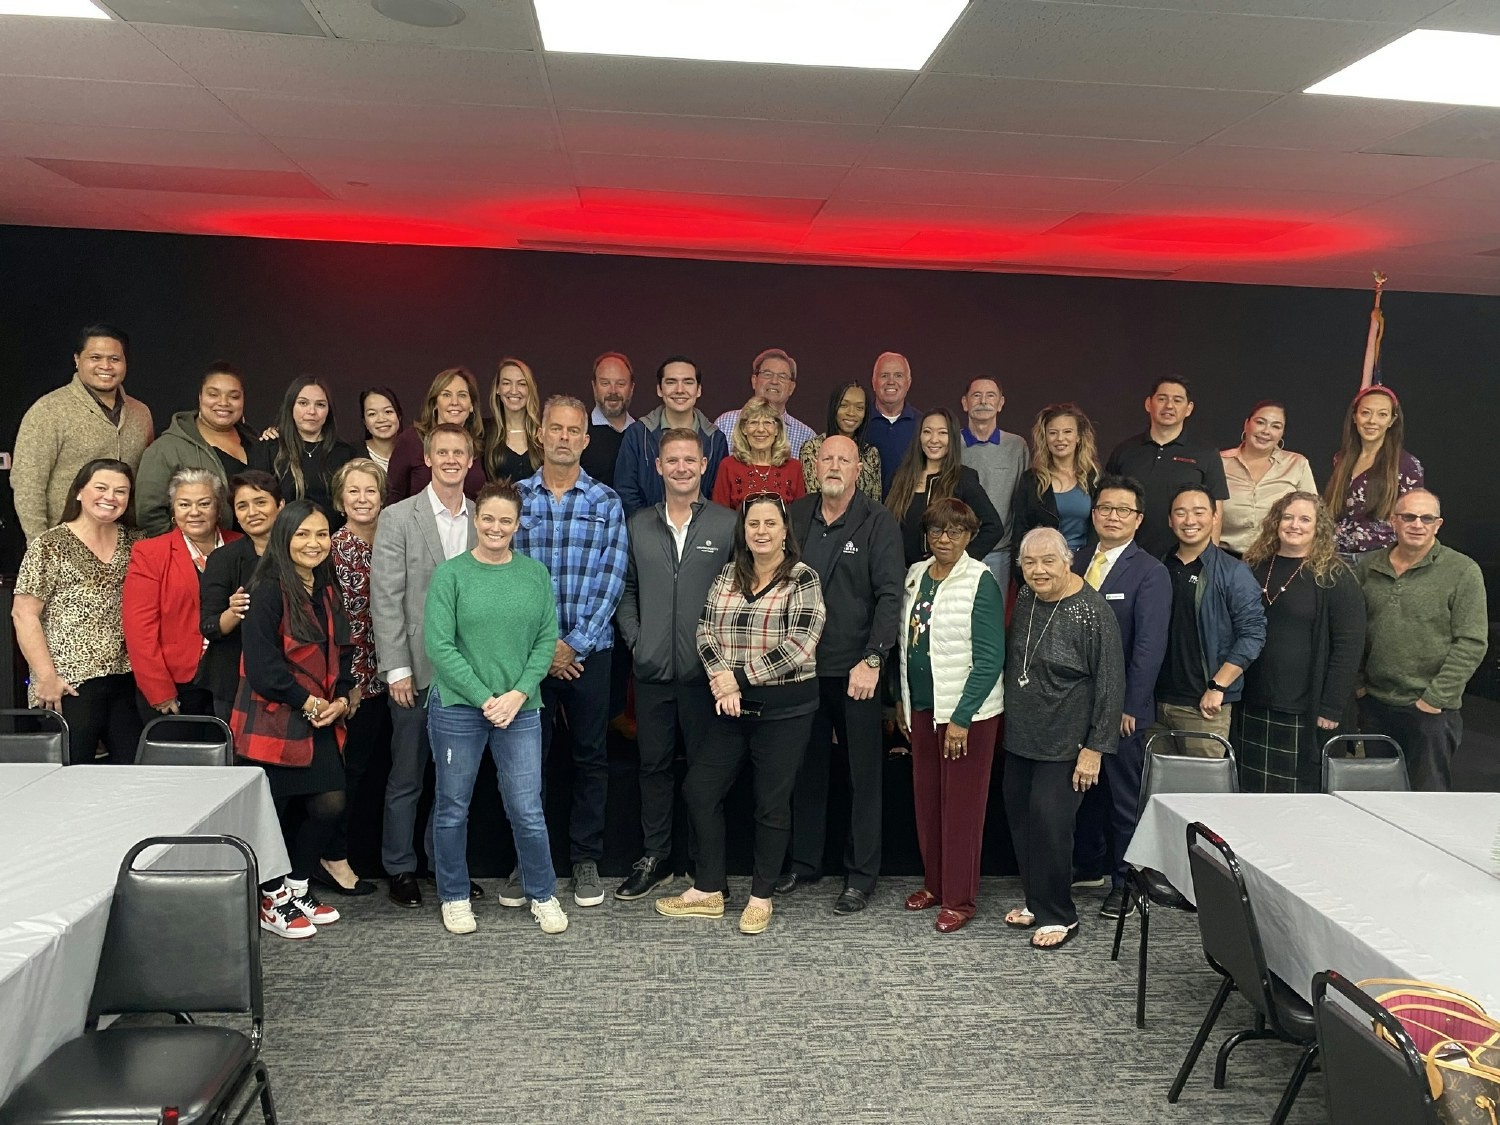 SBAOR's Annual Committee Holiday Potluck